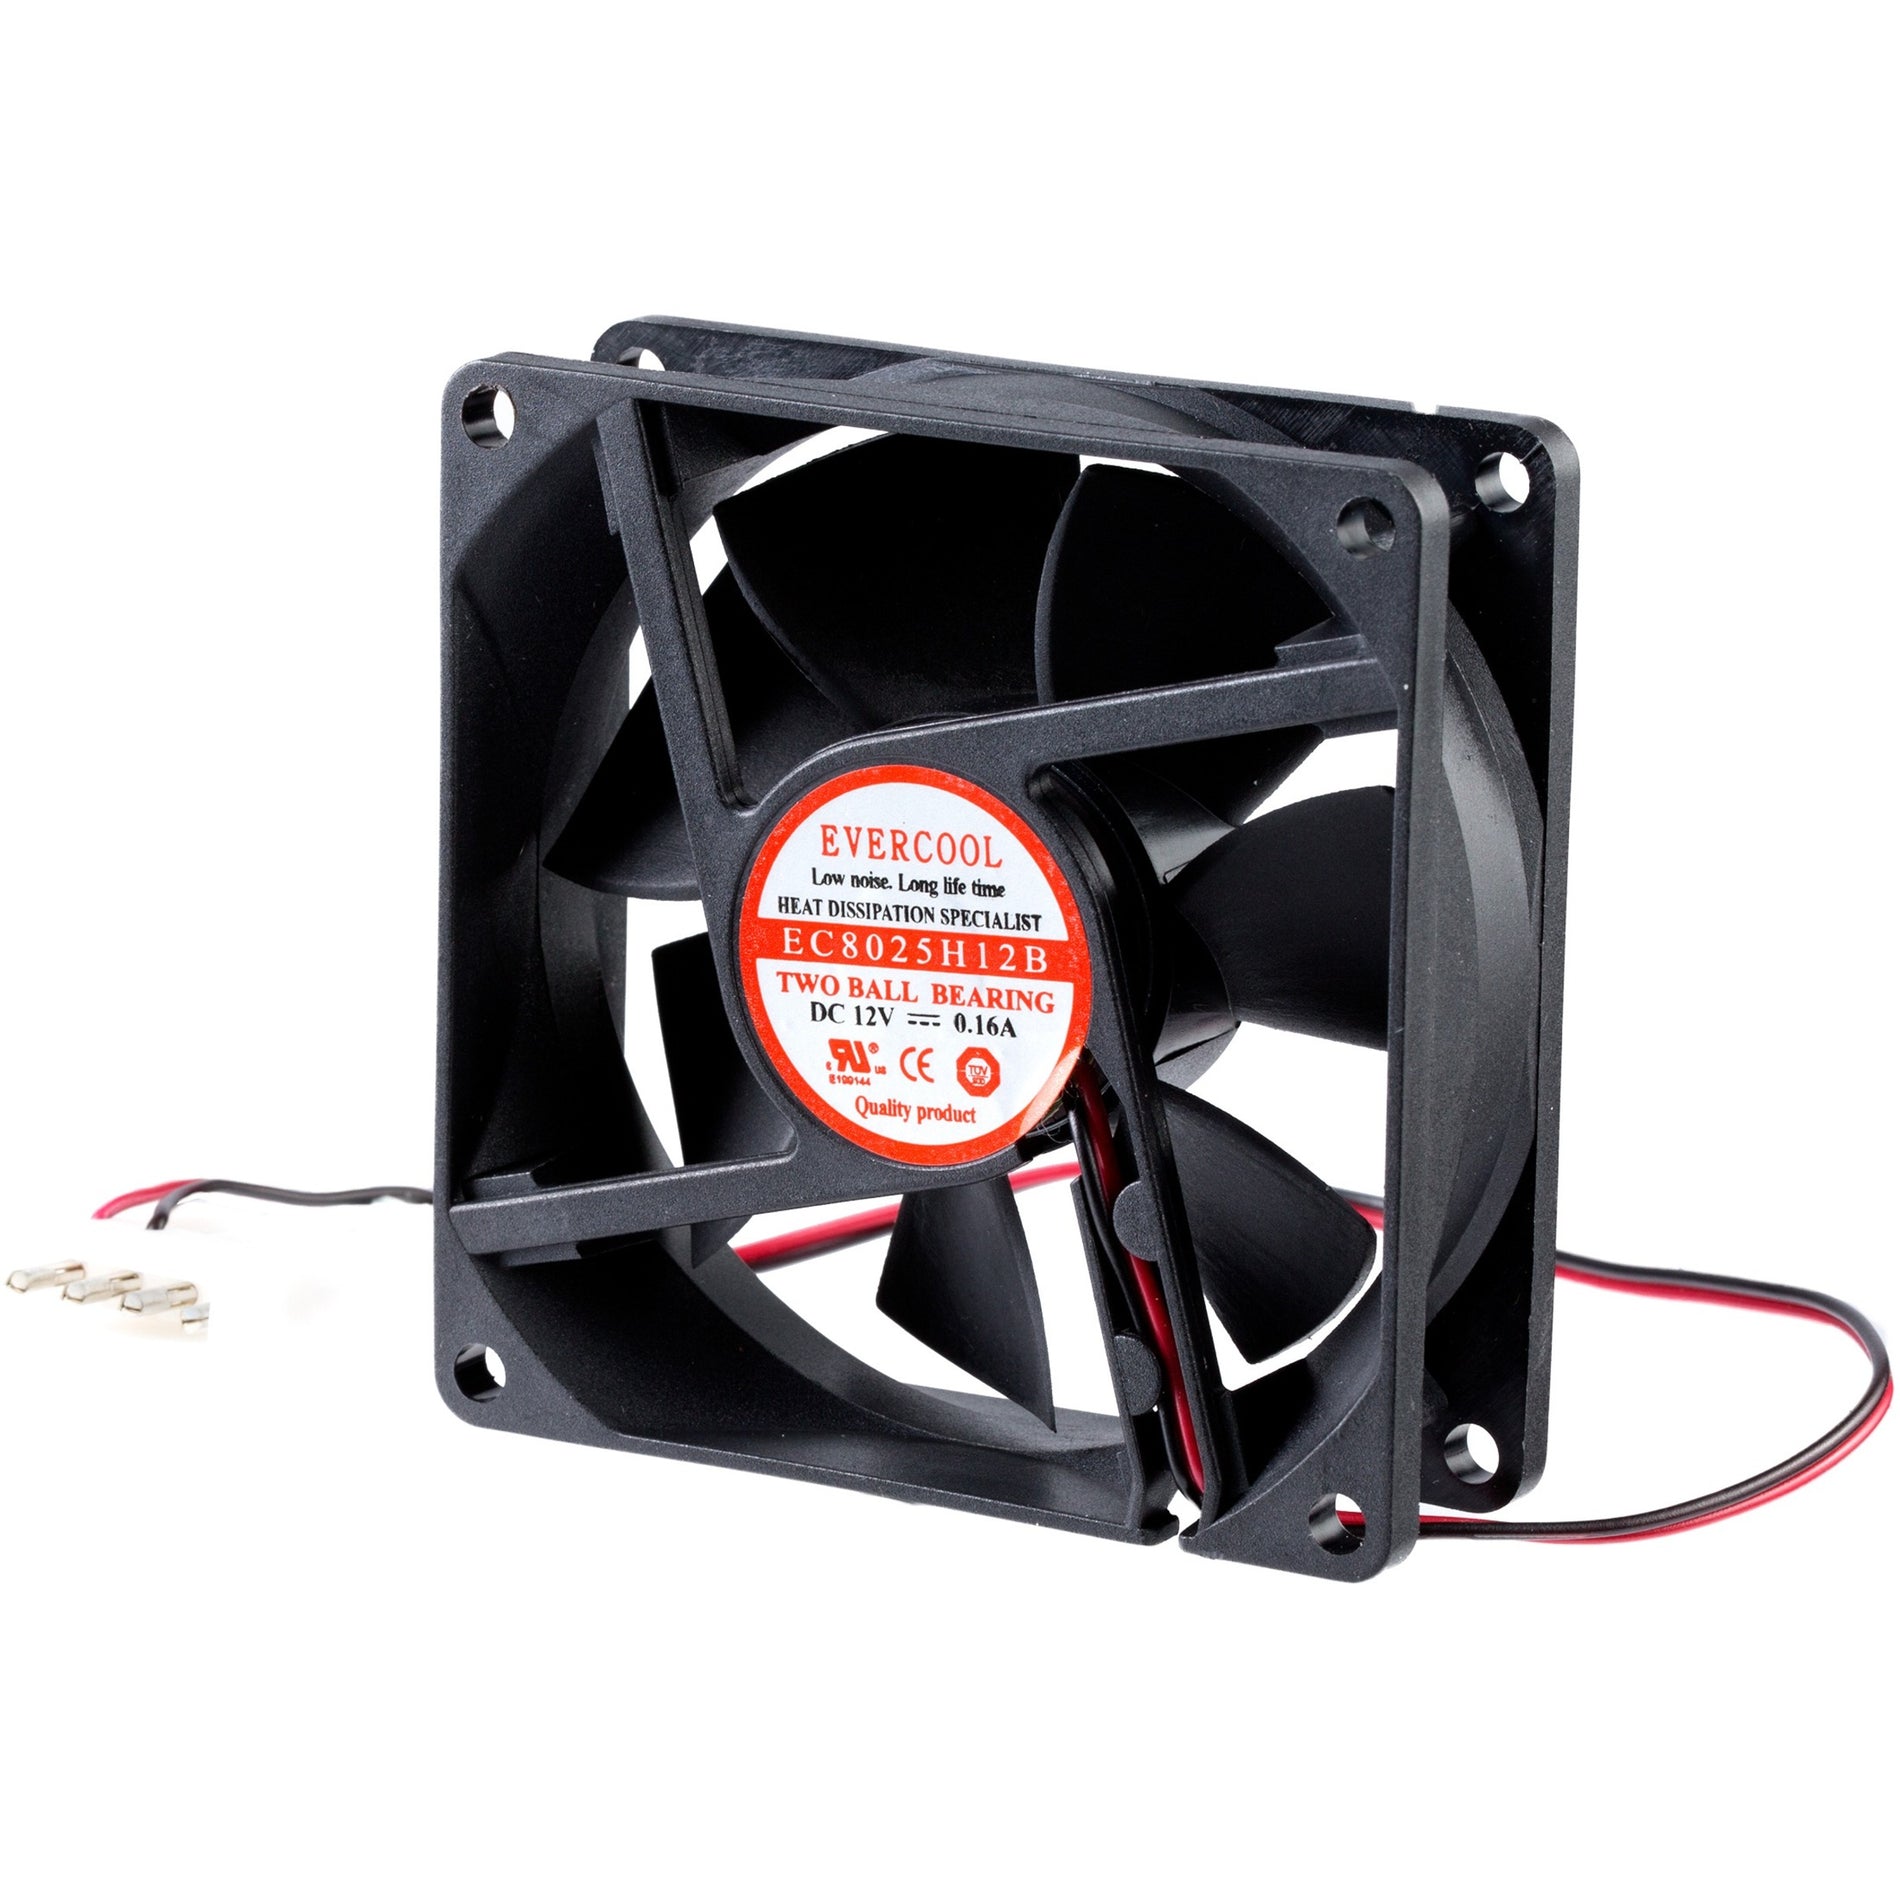 StarTech.com FANBOX 80mm Dual Ball Bearing CPU Case Fan LP4, Reliable Cooling Solution for Your PC Case